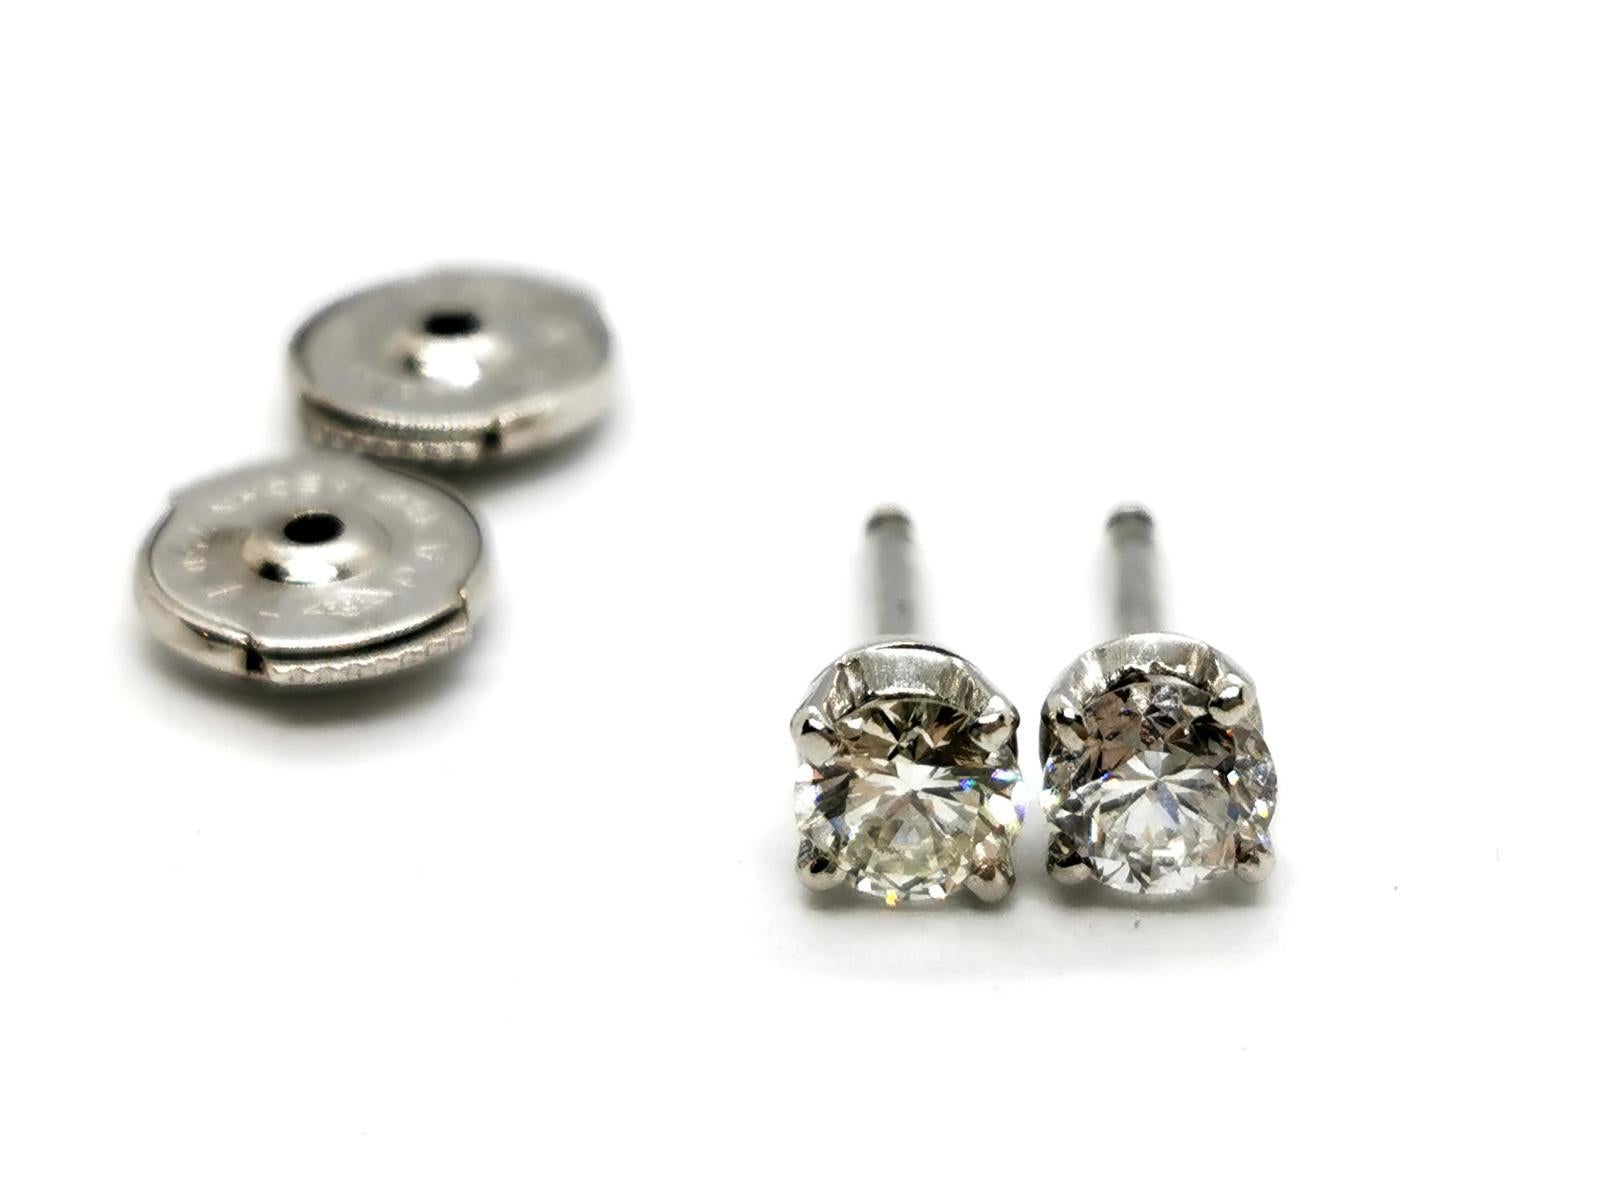 ears diamond chips. blank 750 thousandths gold (18K) tested. set four claws. two brilliant cut diamonds of 0.24 ct each approximately diamond total weight: about 0.48 ct. dimensions: 0.4 cm x 0.4 cm. total weight: 1.64 g. fasteners alpa. excellent